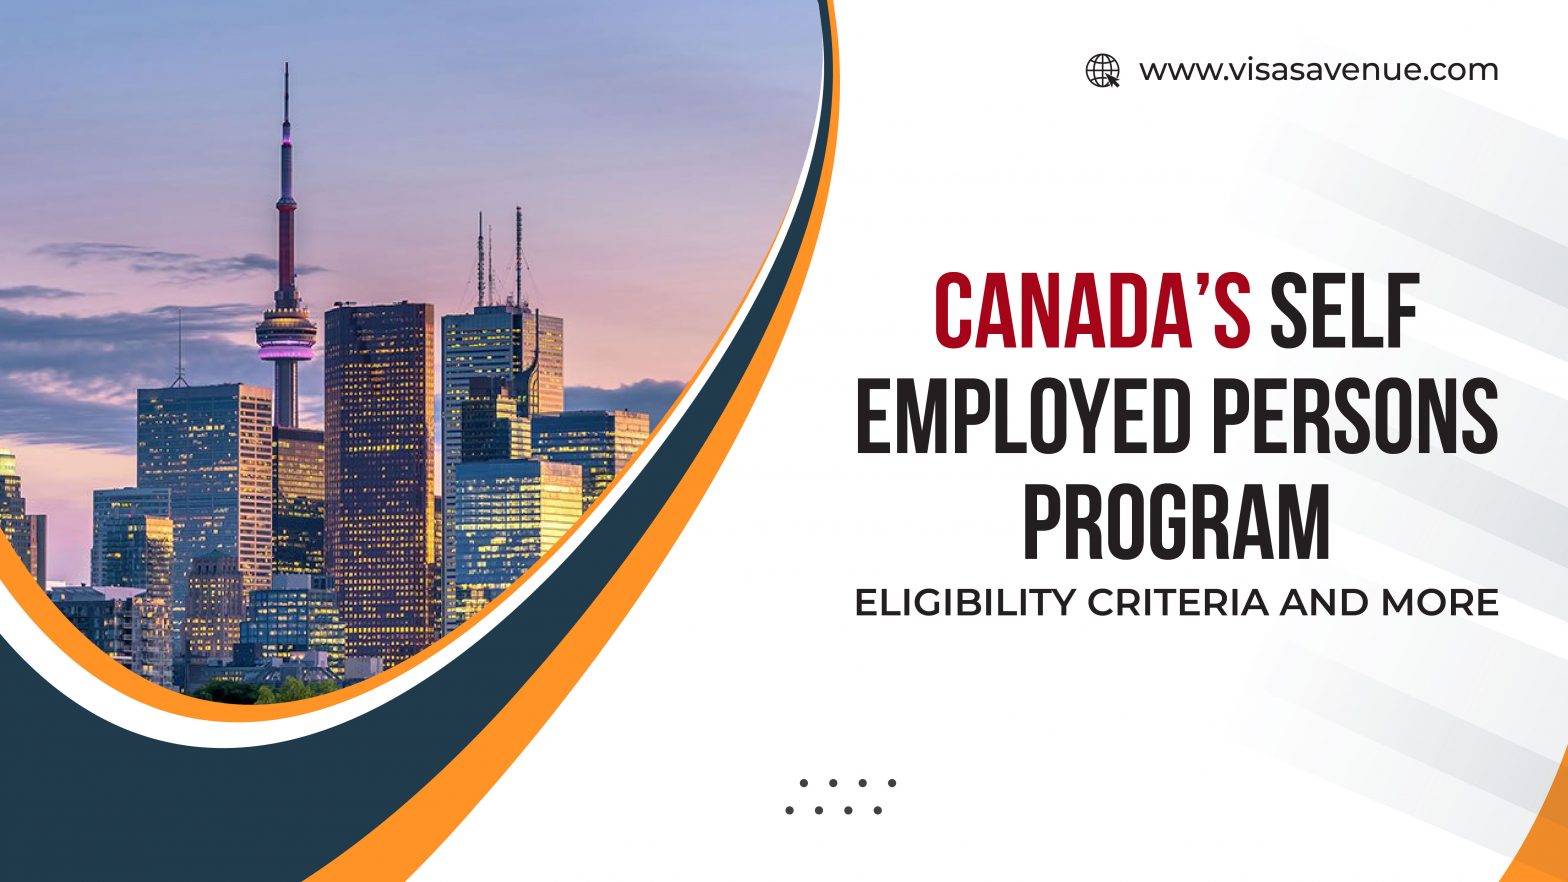 Canada’s Self Employed Persons Program Eligibility Criteria and more